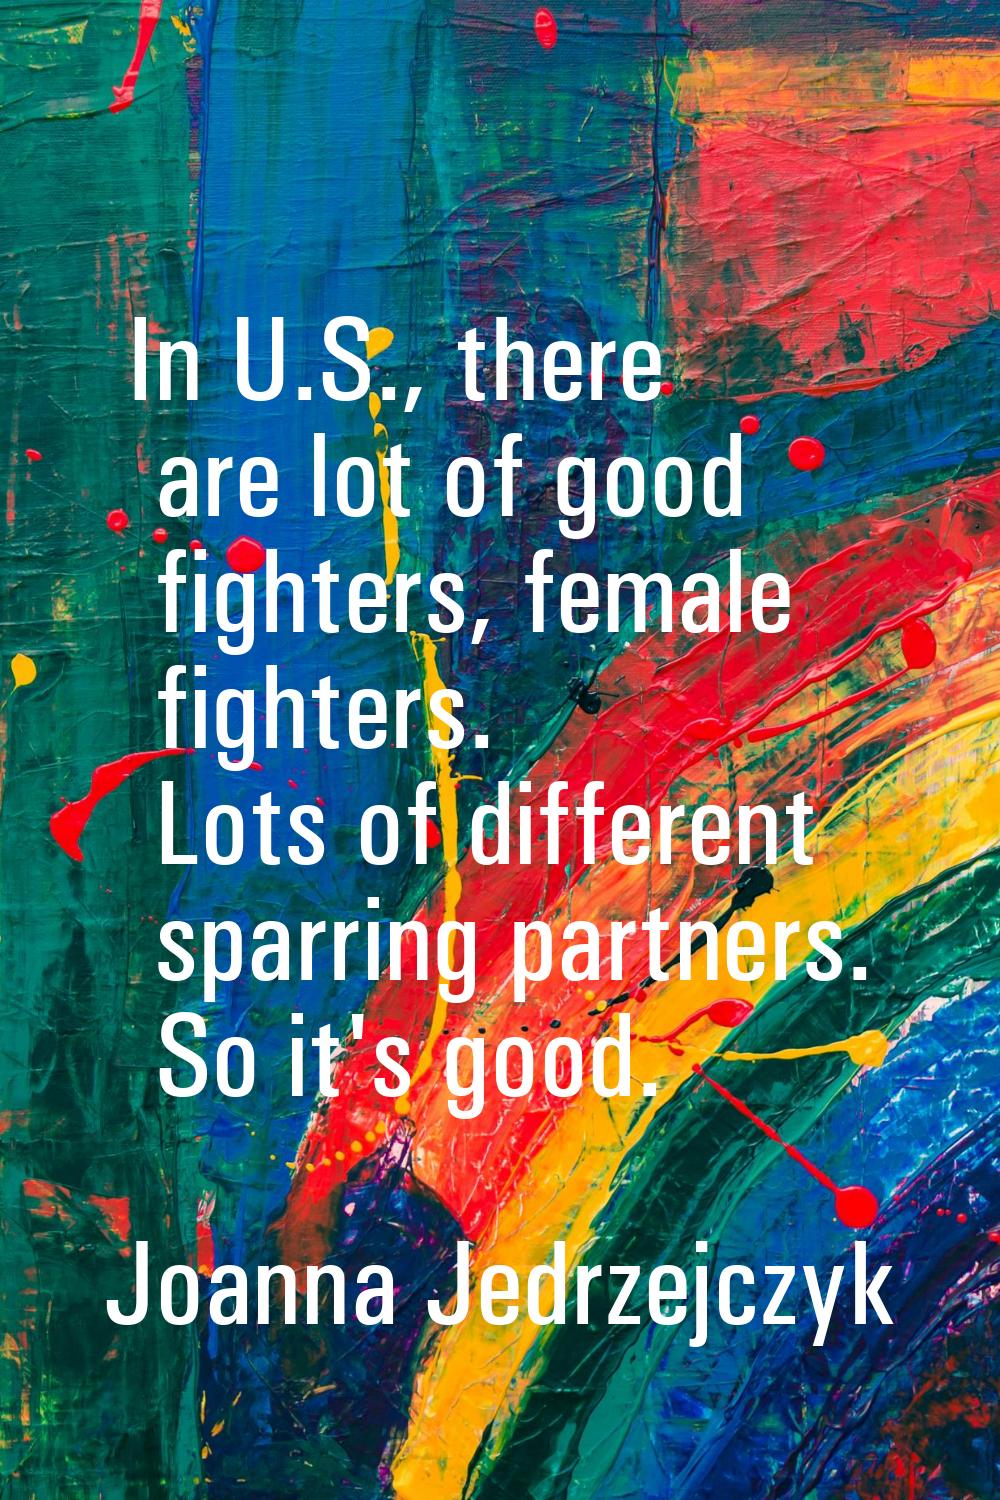 In U.S., there are lot of good fighters, female fighters. Lots of different sparring partners. So i